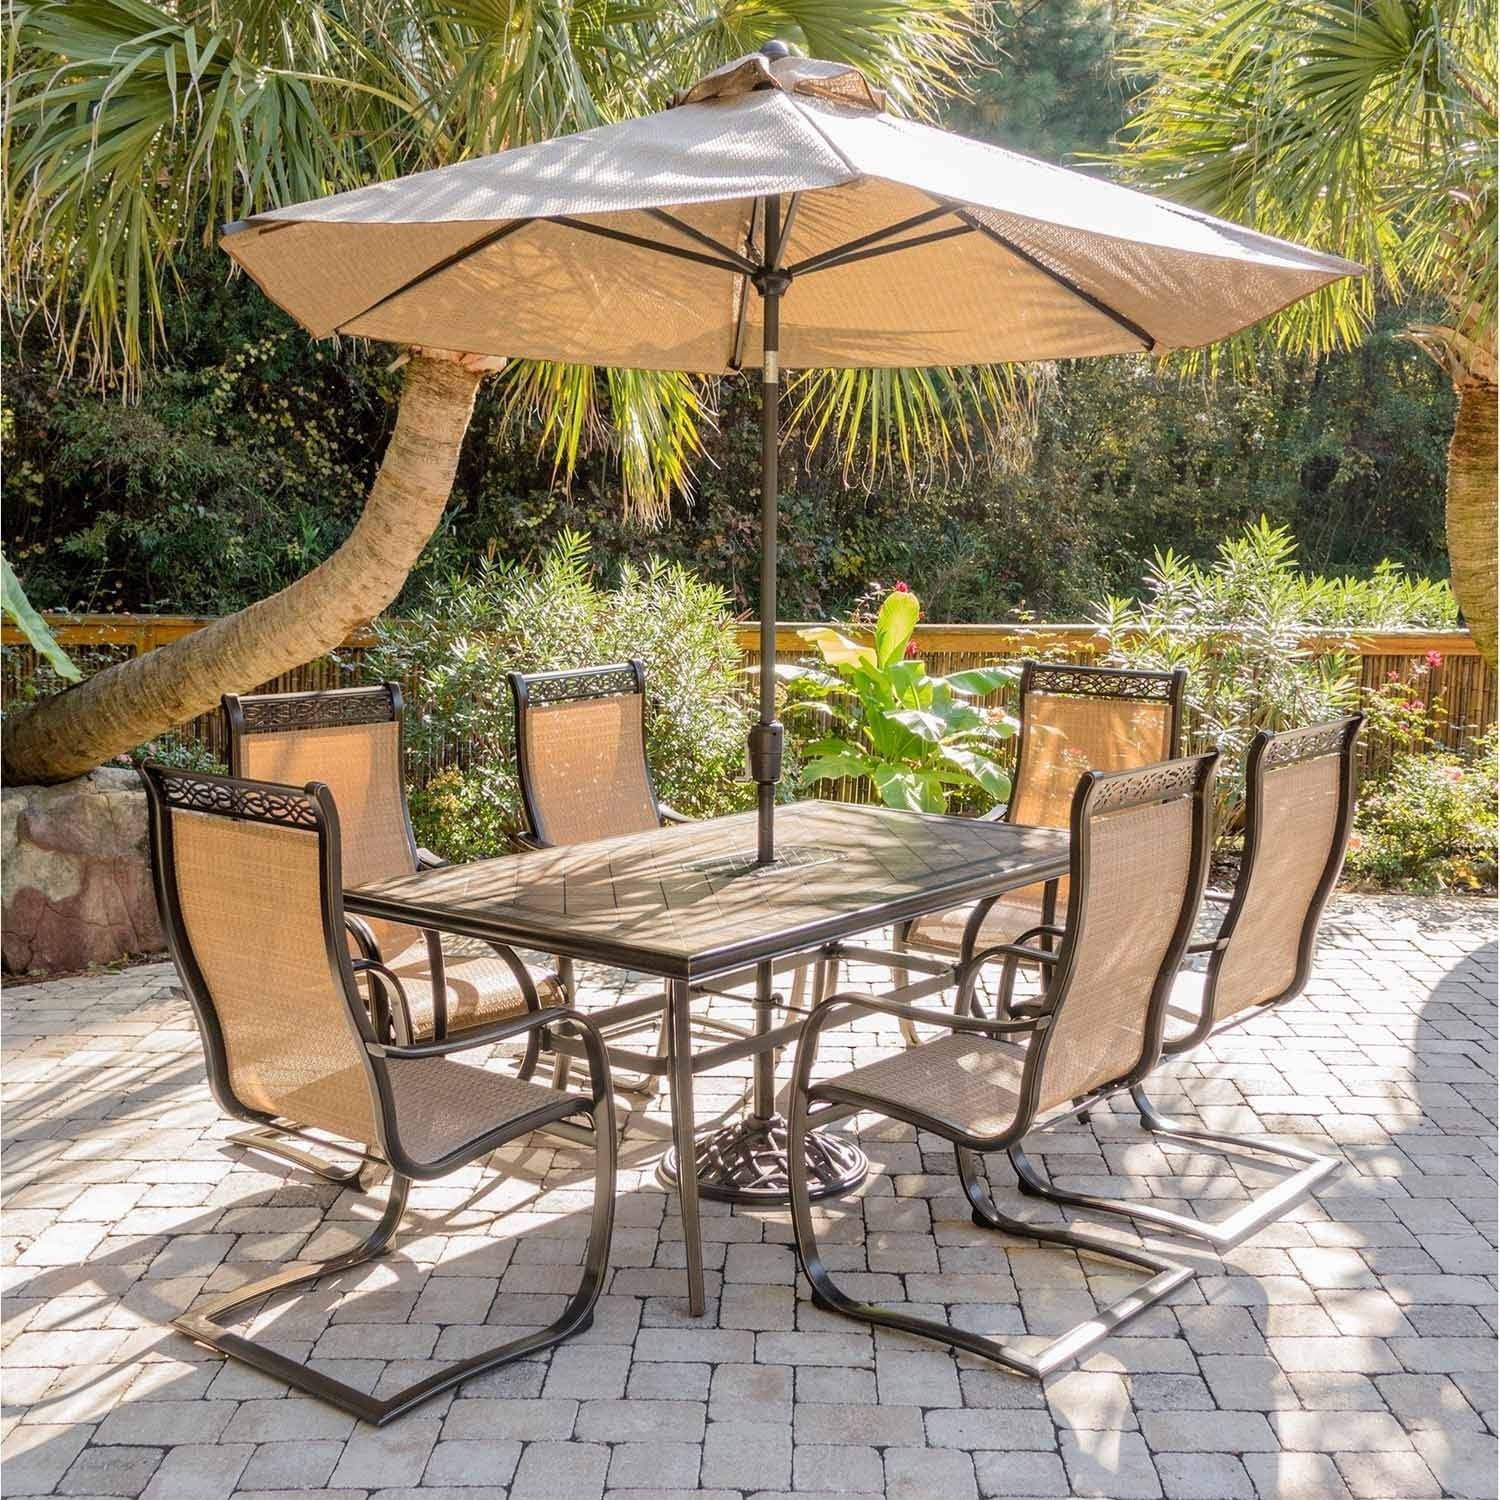 Hanover Outdoor Monaco 7-Piece Tile-Top Dining Set with ...